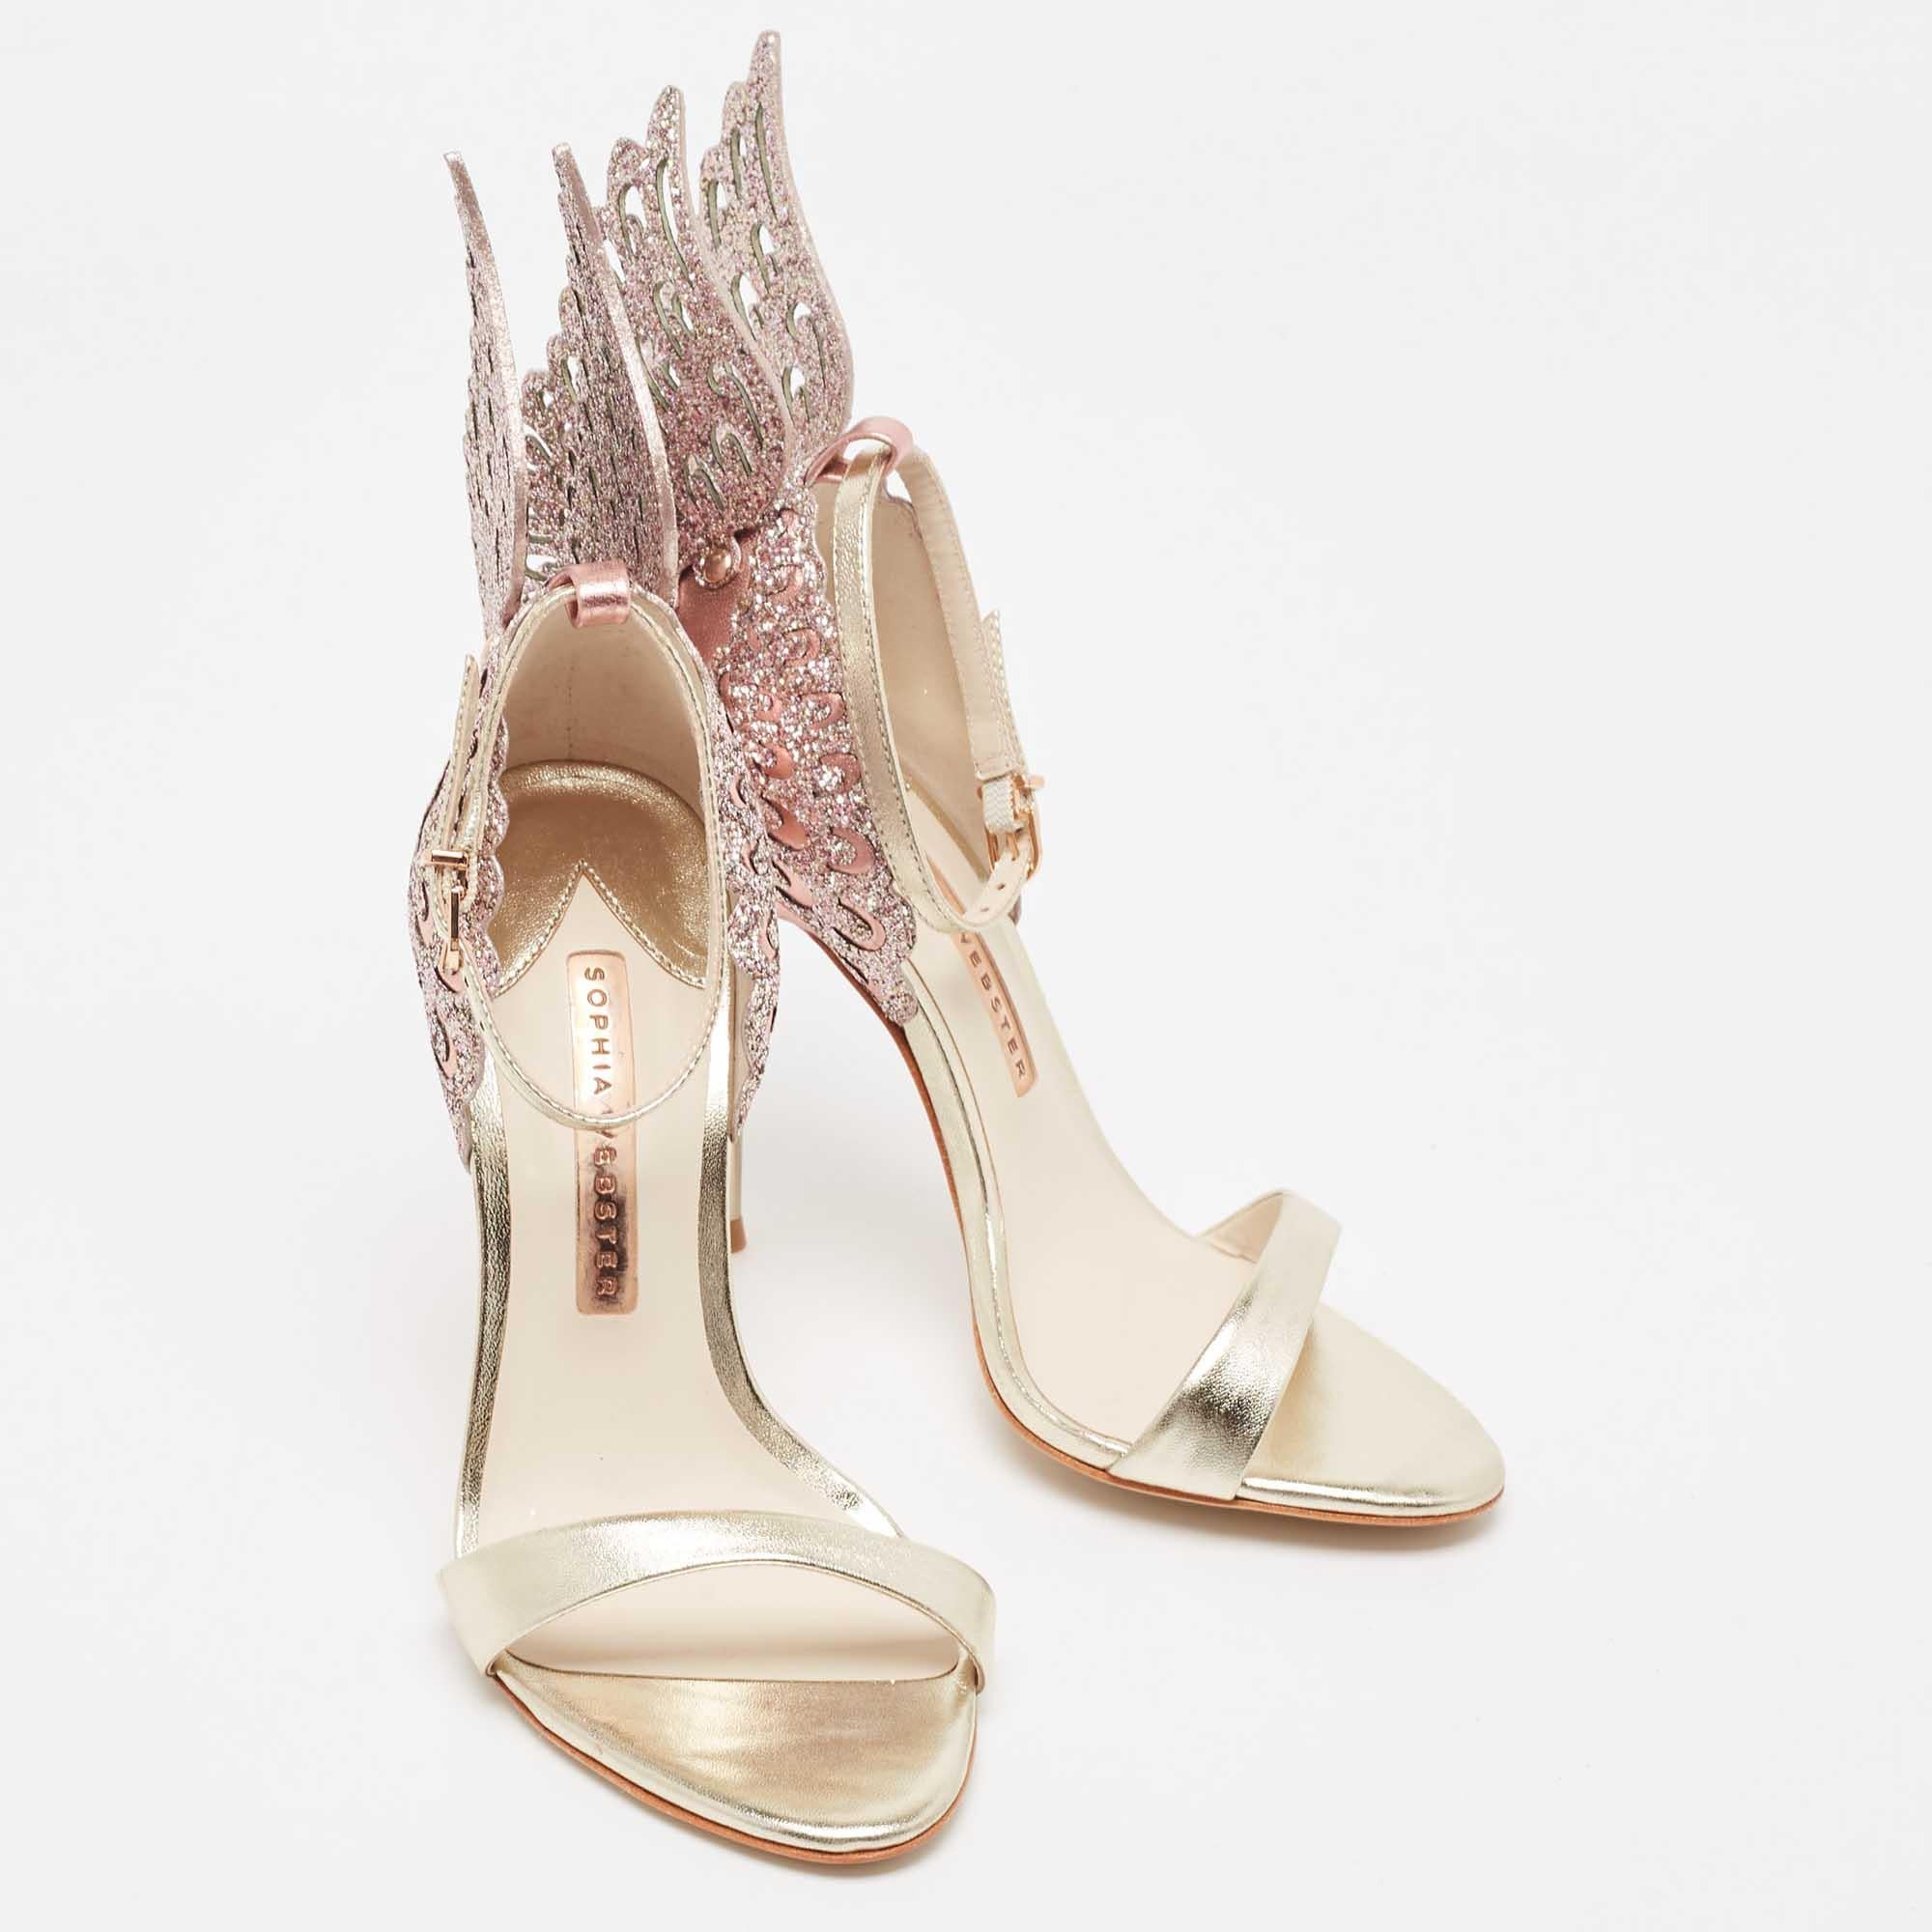 Beige Sophia Webster Gold/Pink Leather and Glitter Chiara Ankle Strap Sandals Size 36